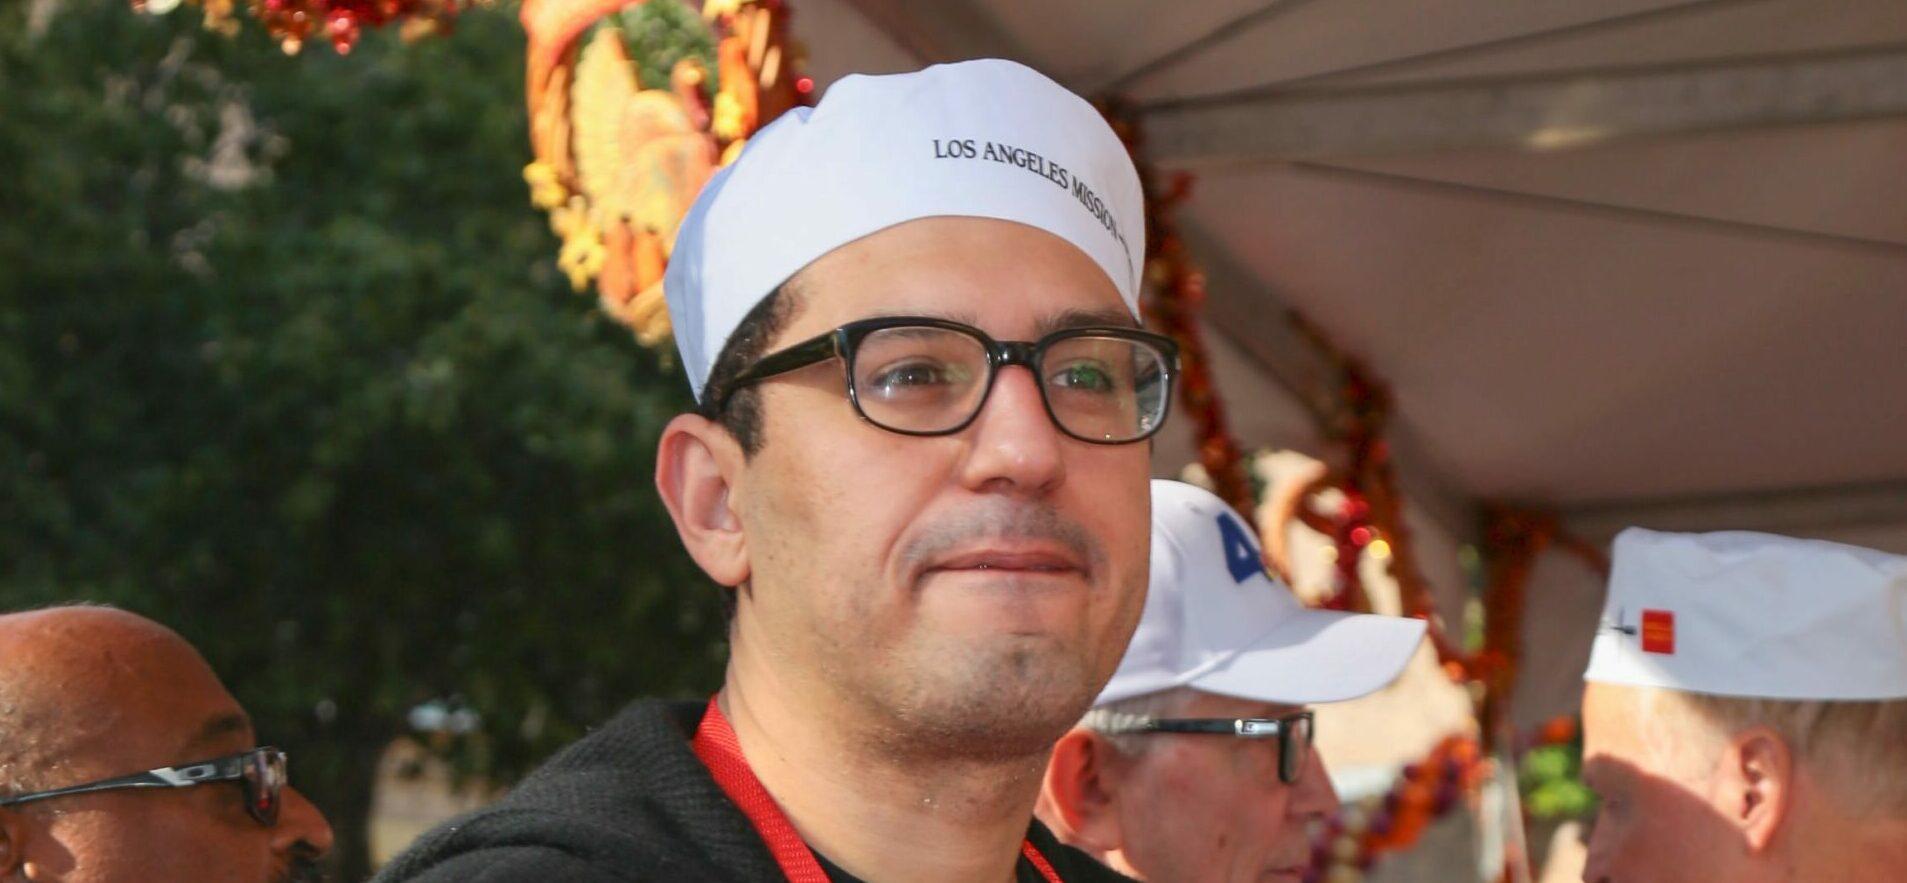 Sam Esmail serves Thanksgiving Dinner to the homeless in Los Angeles